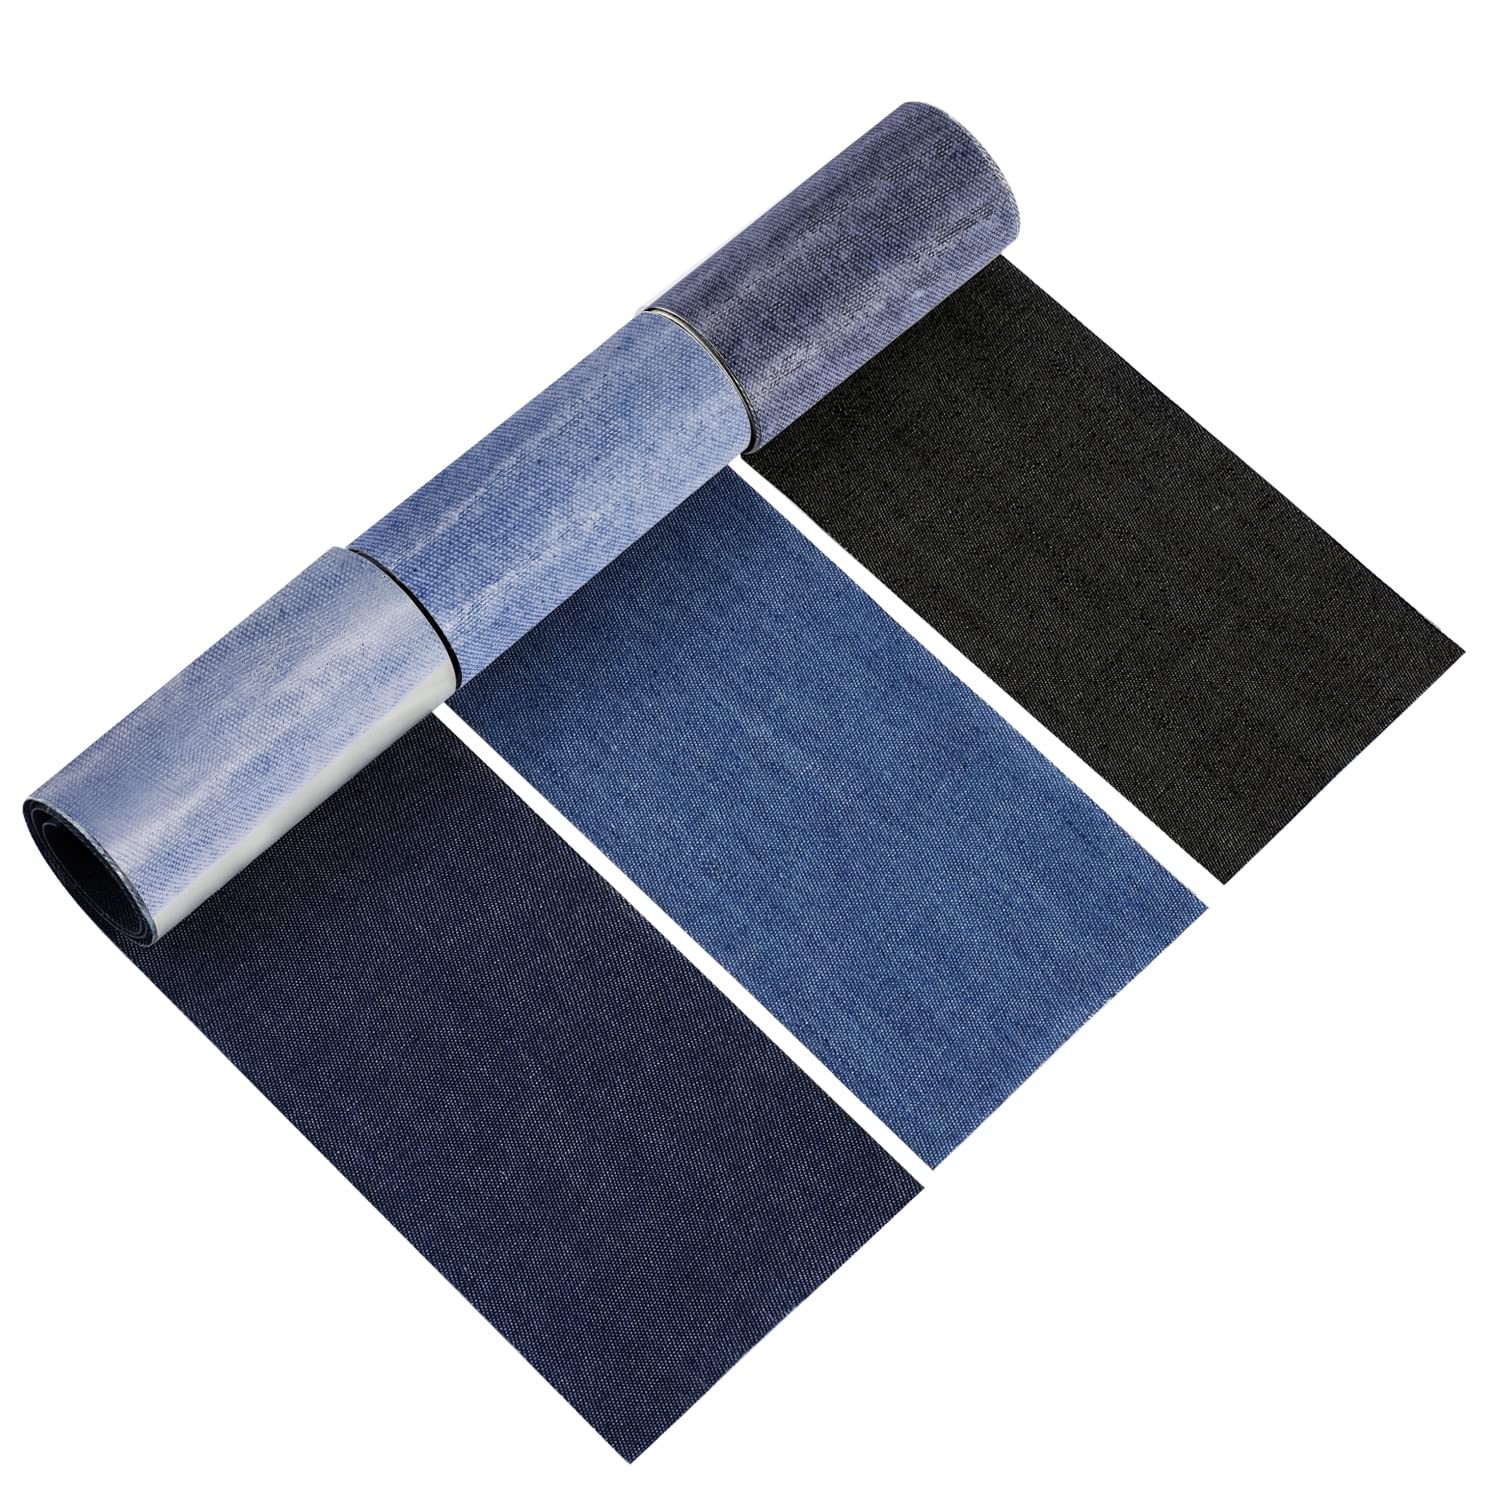 Jeans Denim Patches 3 Rolls , 3 x 20 Inside and Outside Iron On